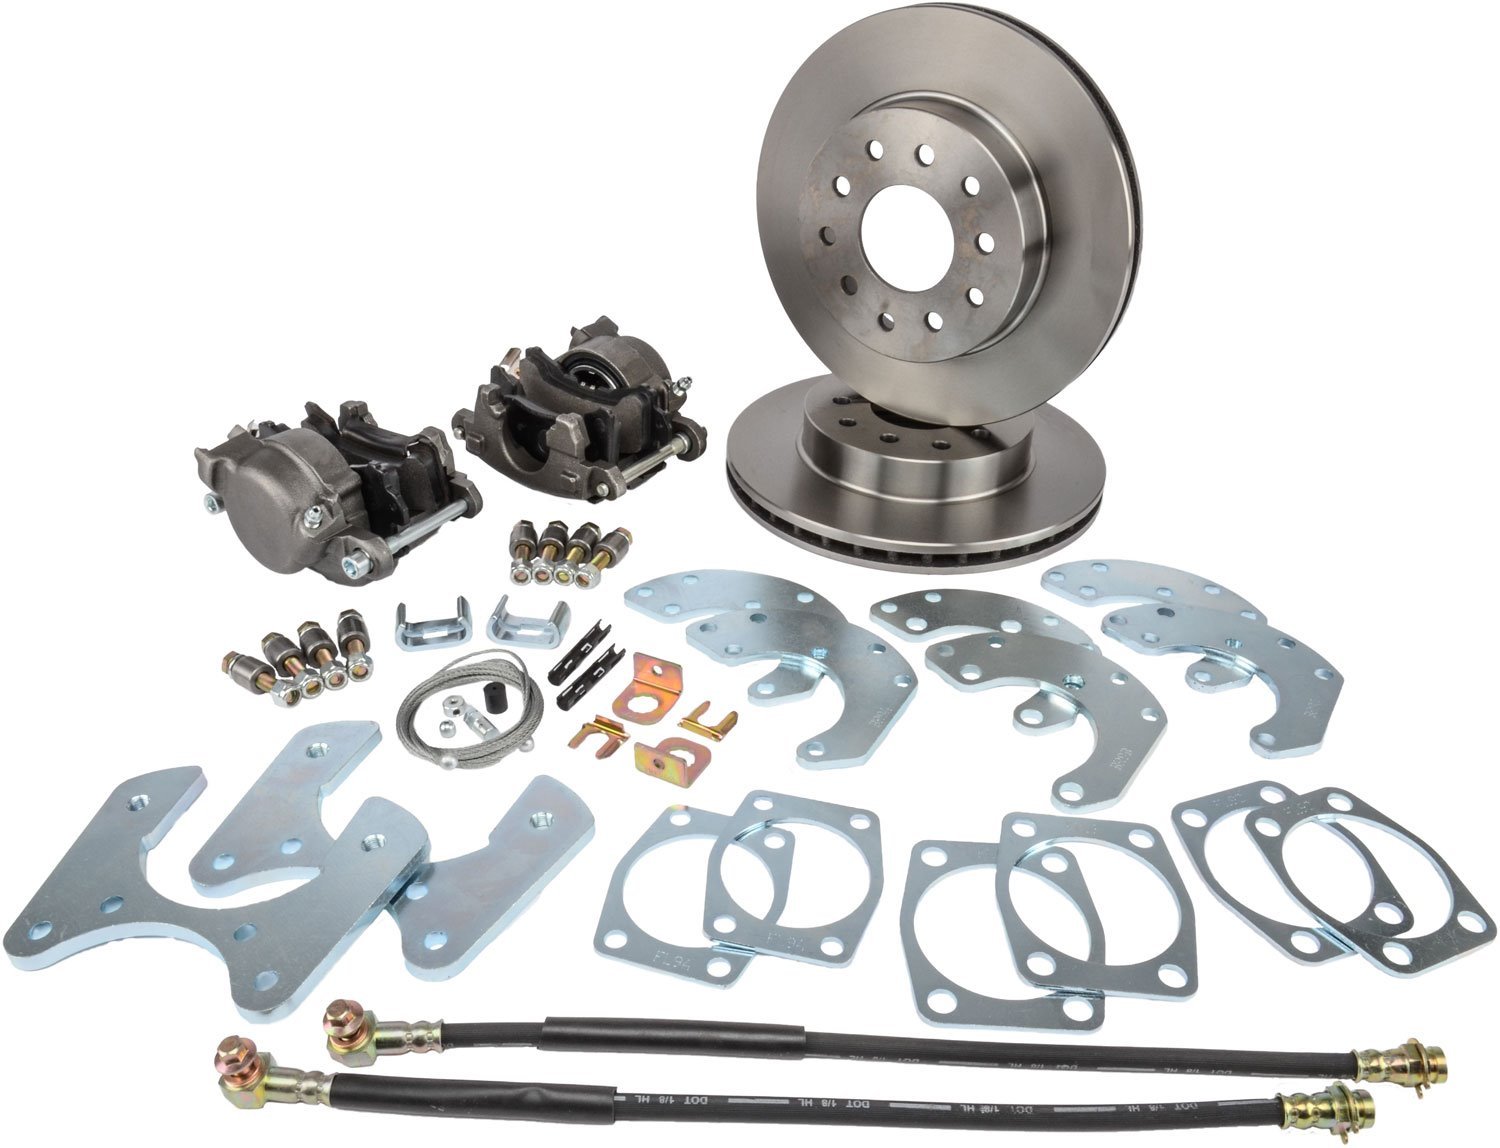 Ford 9 in. Rear Disc Brake Conversion Kit for Select 1968-1977 Ford Cars [Standard Kit Non E-Brake & Raw Calipers]